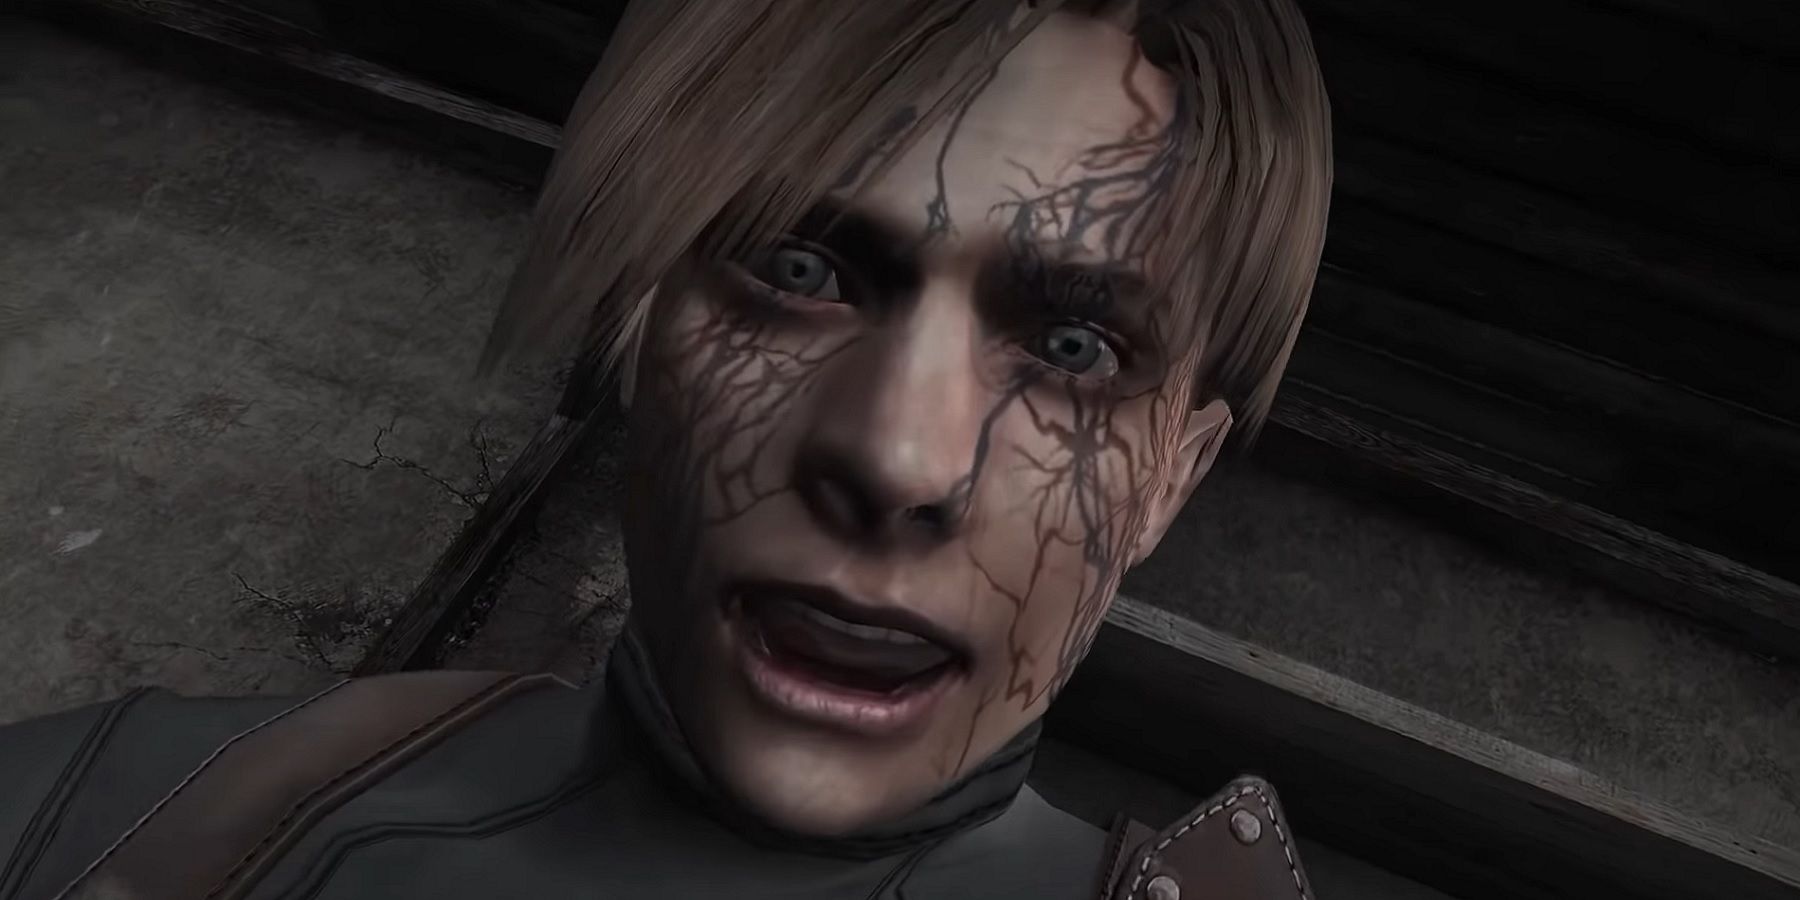 Image from Resident Evil 4 showing a close-up of Leon's infected face.